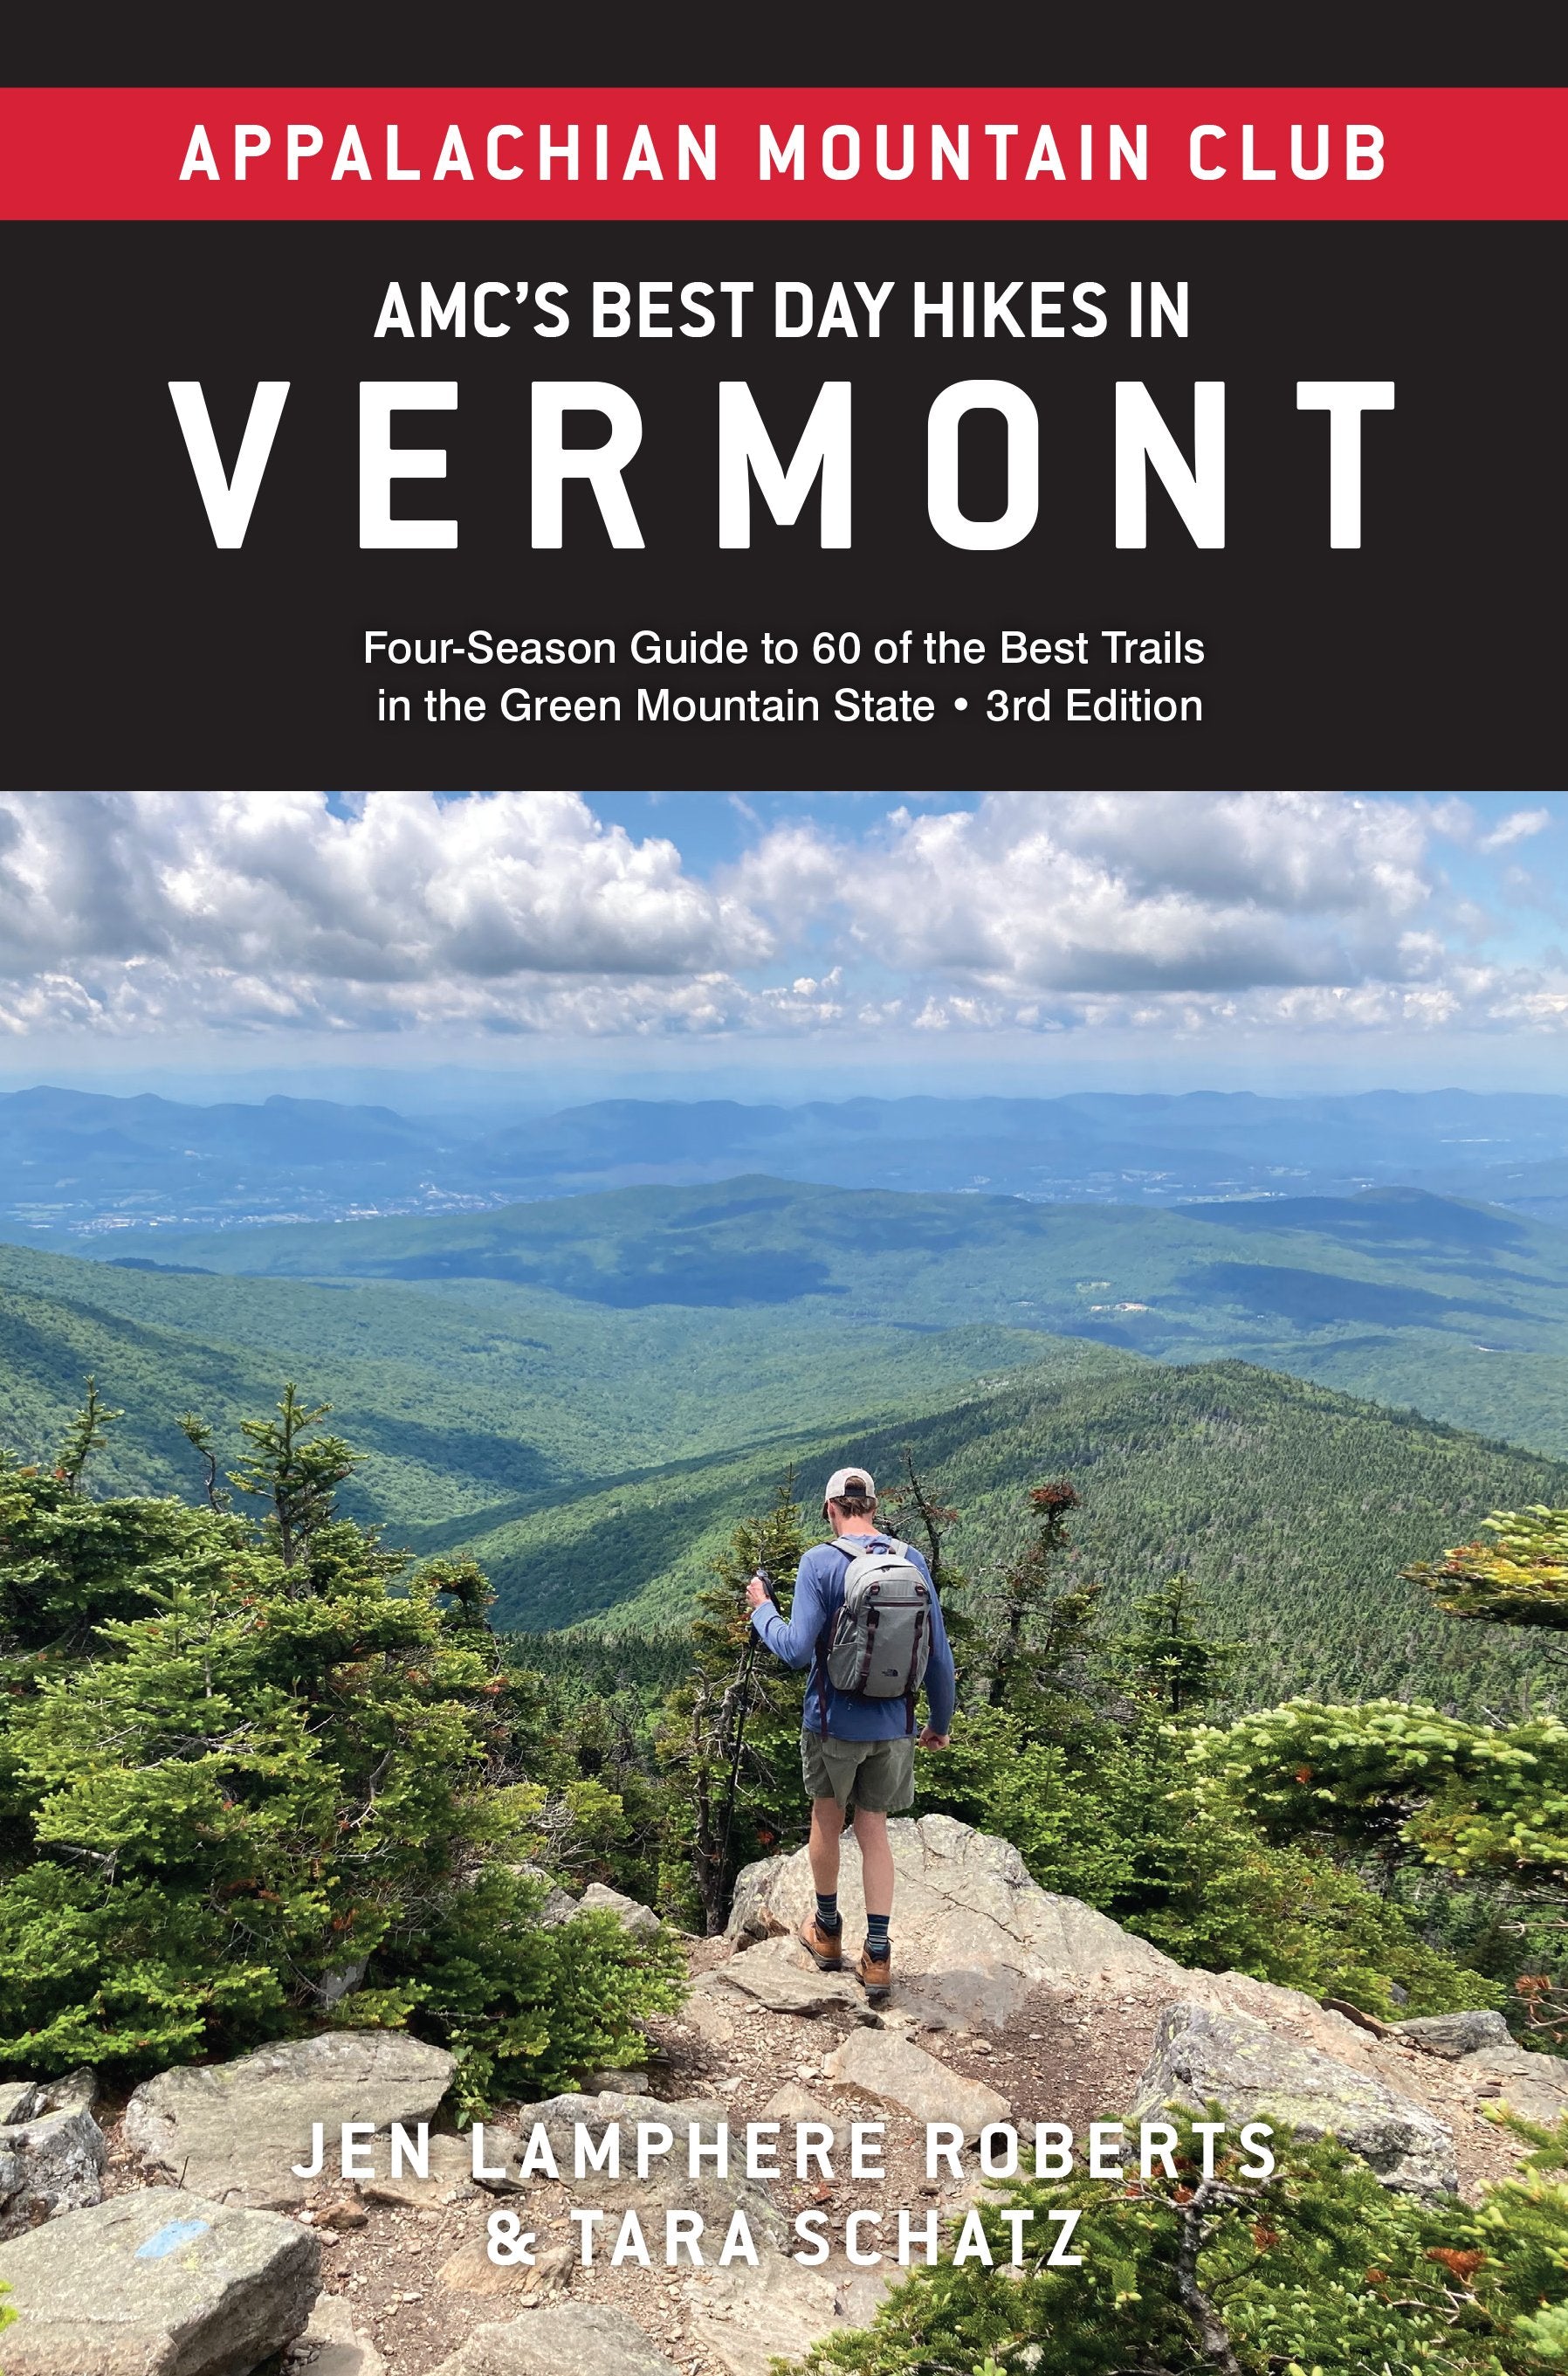 AMC's Best Day Hikes in Vermont, 3rd Edition